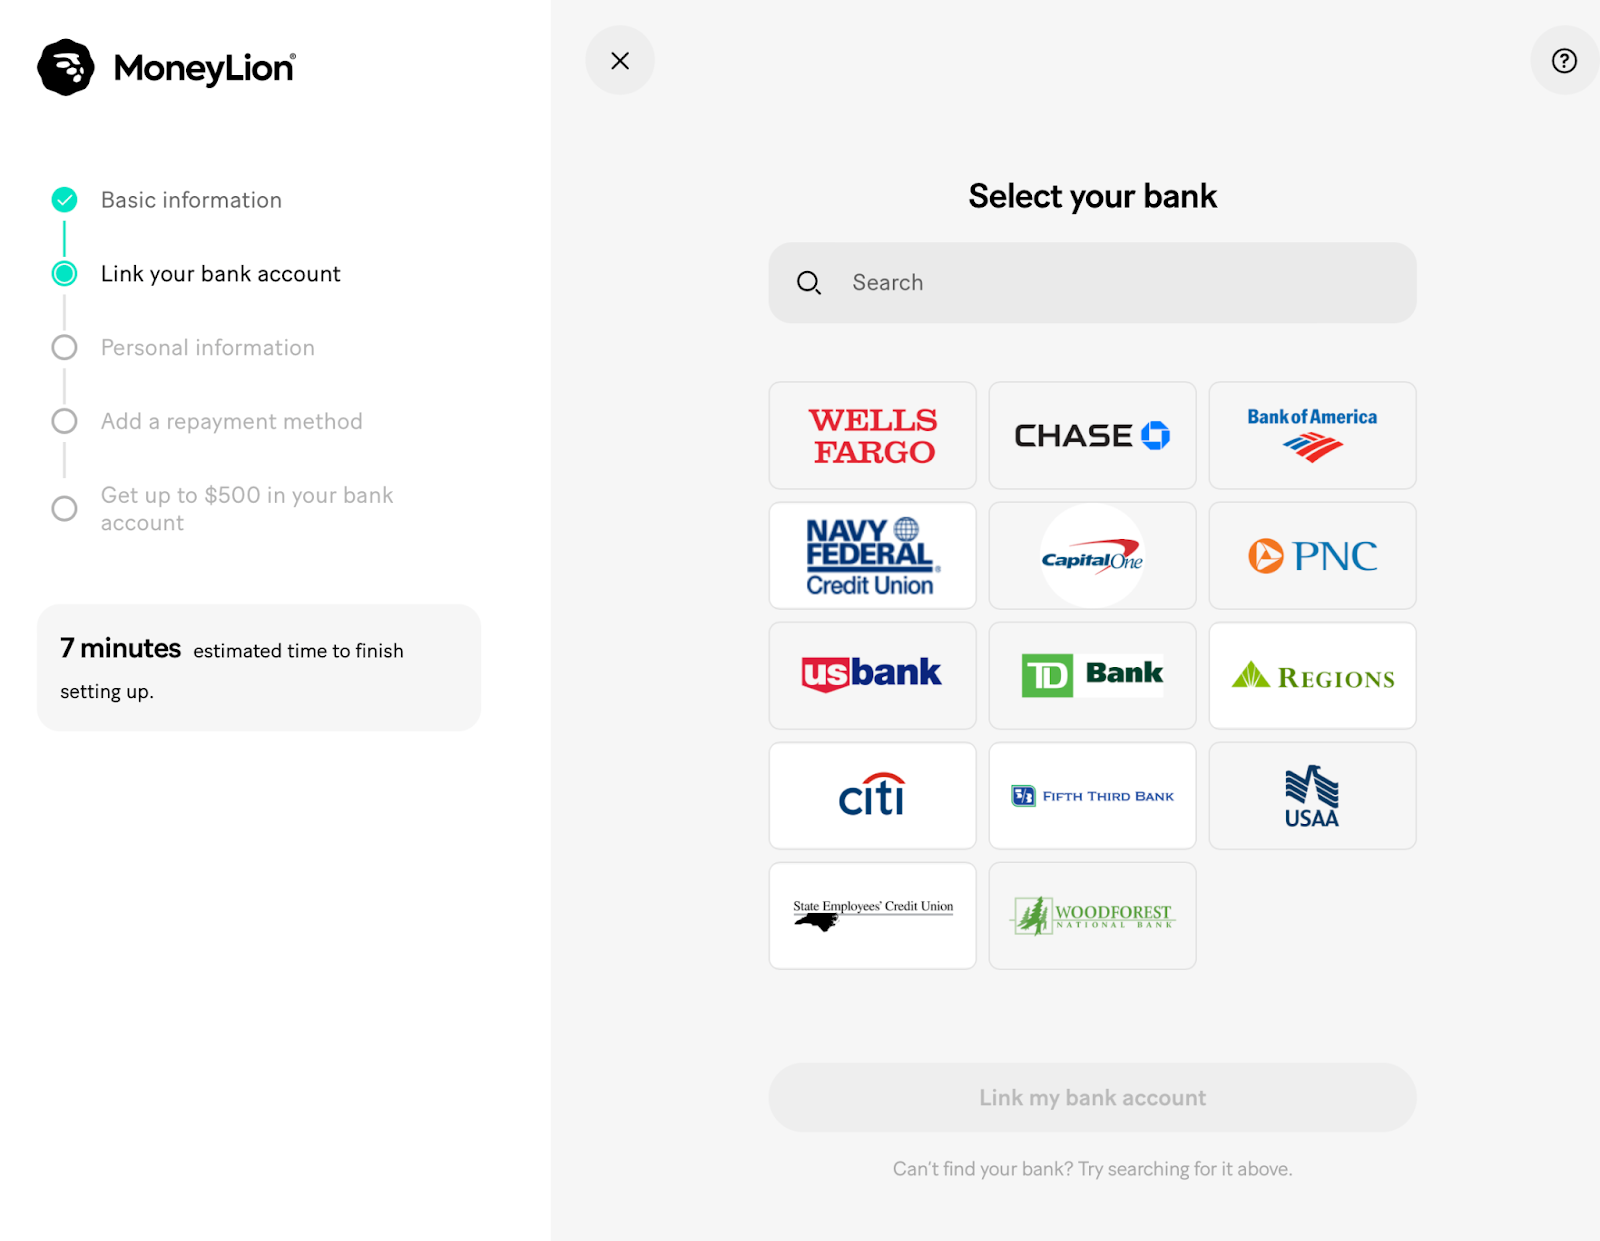 A screenshot showing MoneyLion's bank linking interface with an estimated time to finish setup and a list of accepted banks.